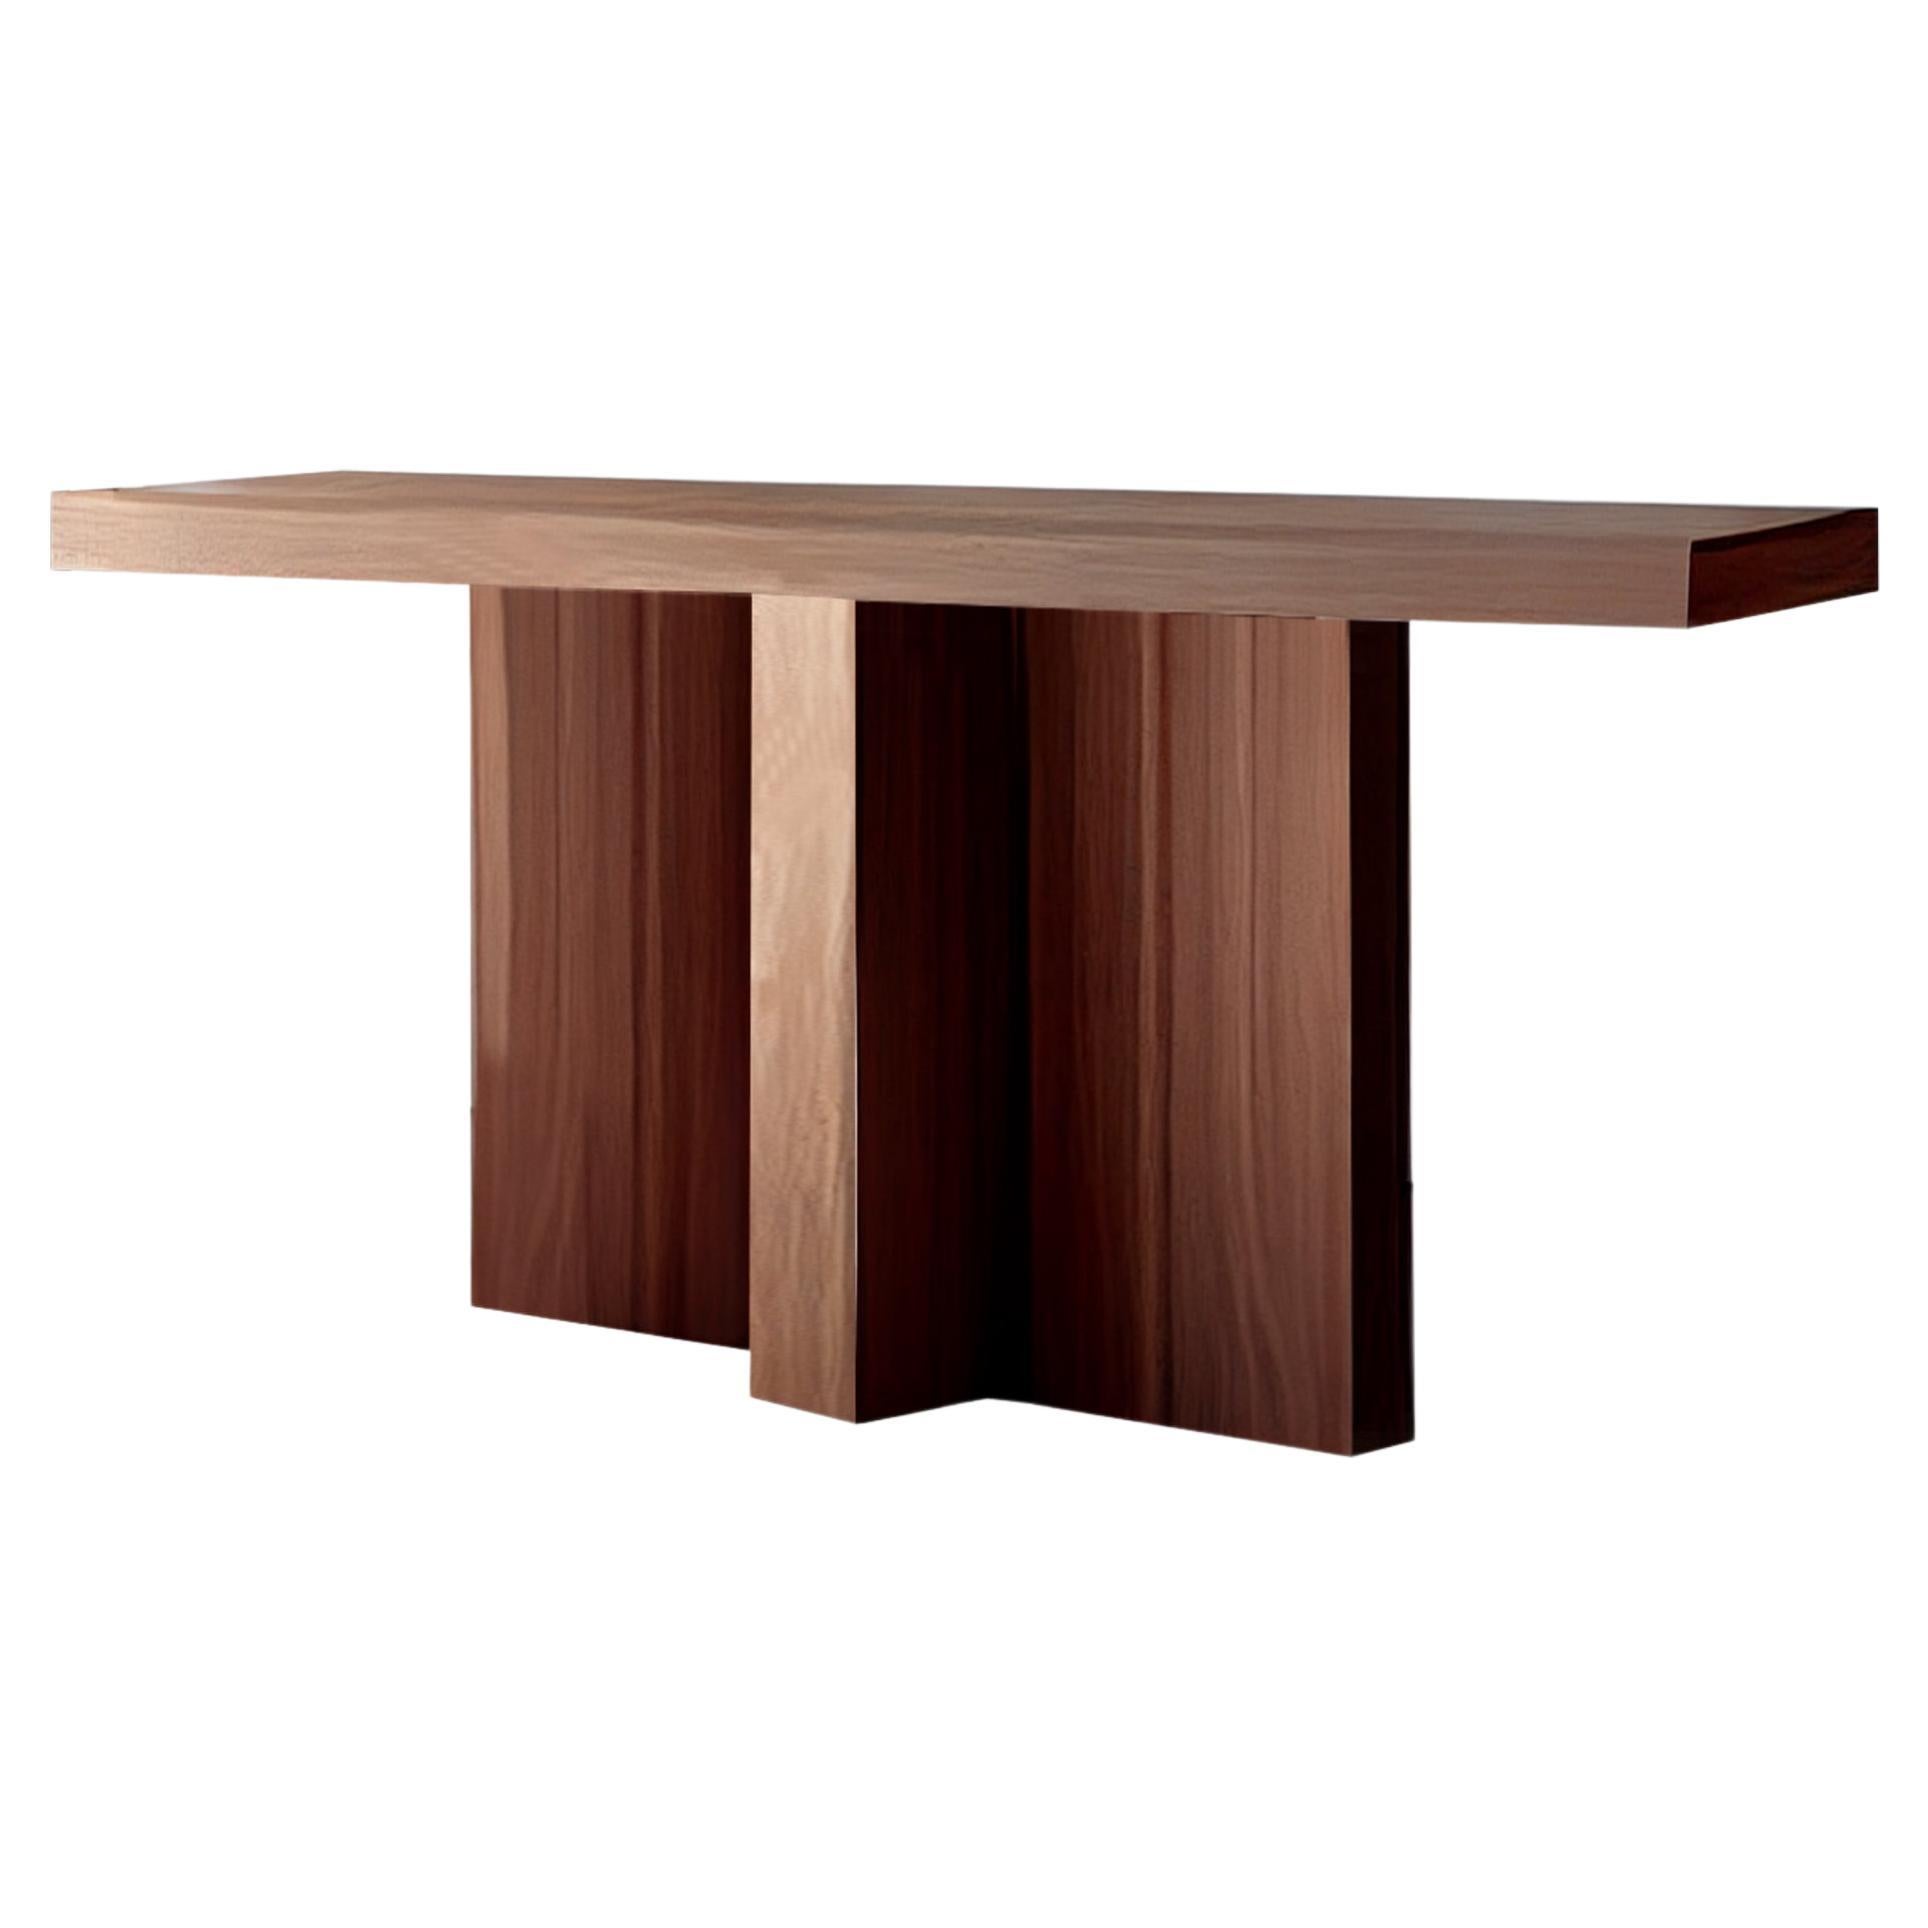 Basic Console Table, Sideboard Made of Solid Walnut Wood, Narrow Console by Nono